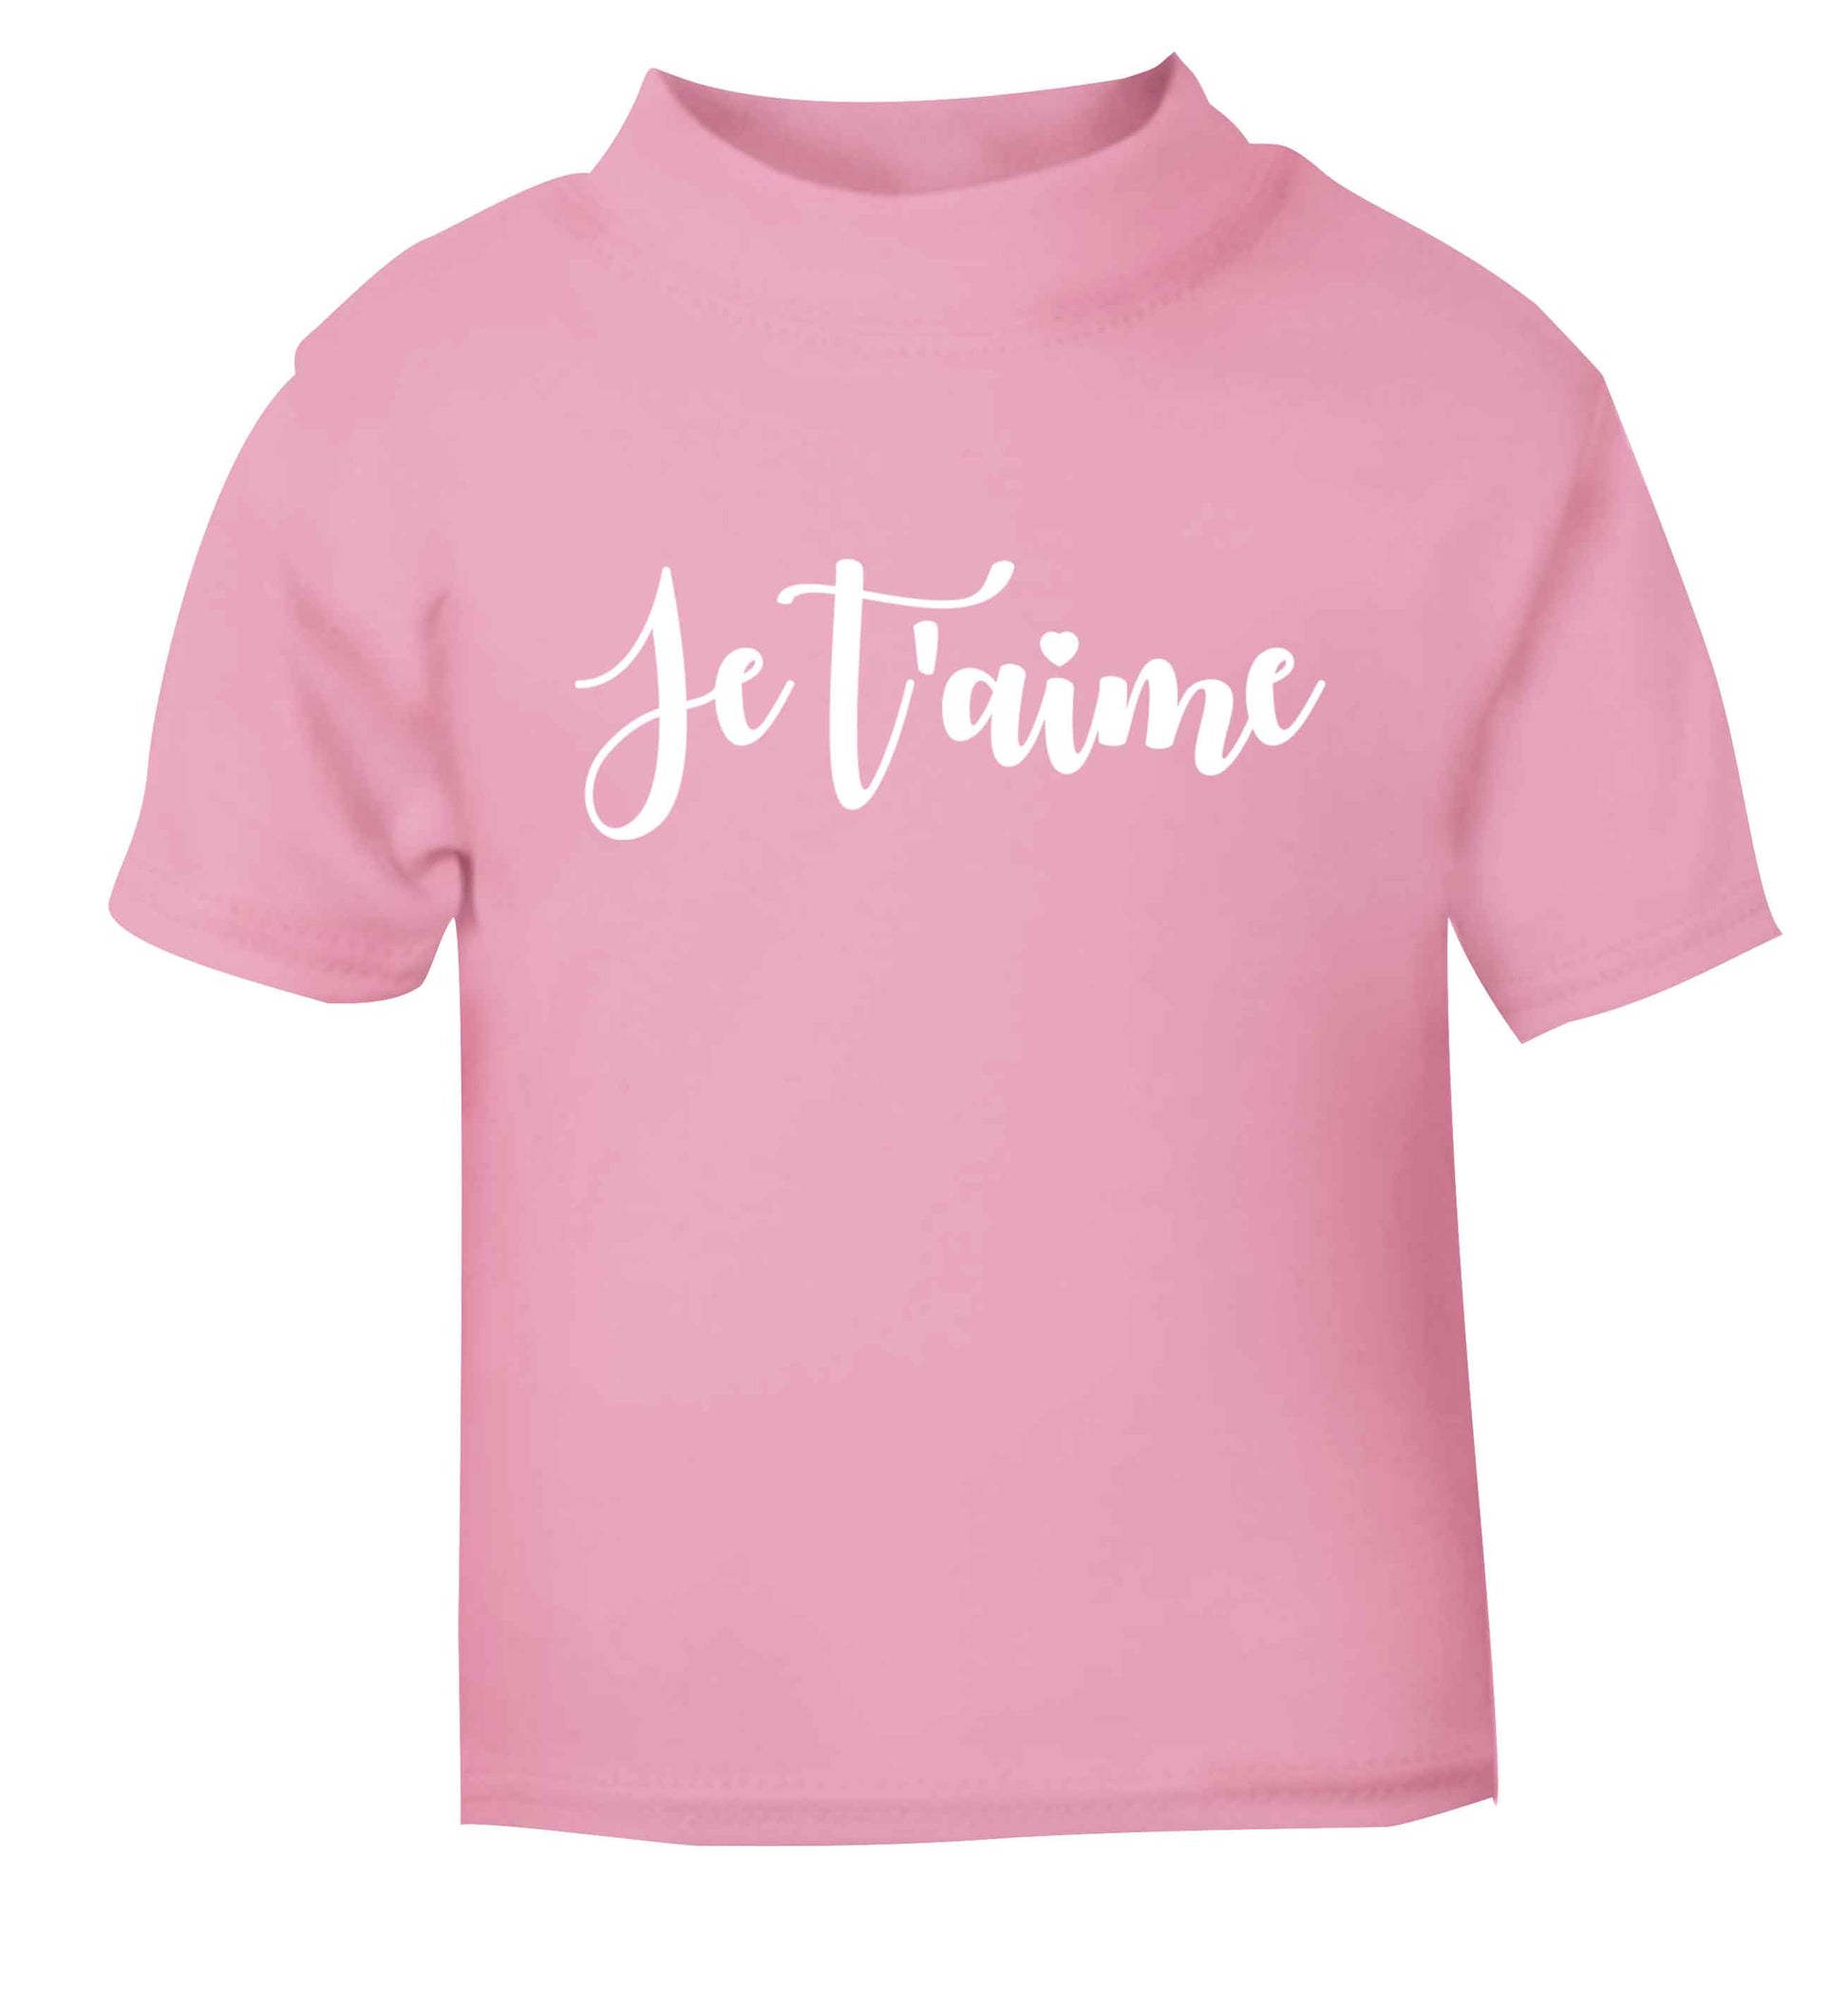 Je t'aime light pink baby toddler Tshirt 2 Years